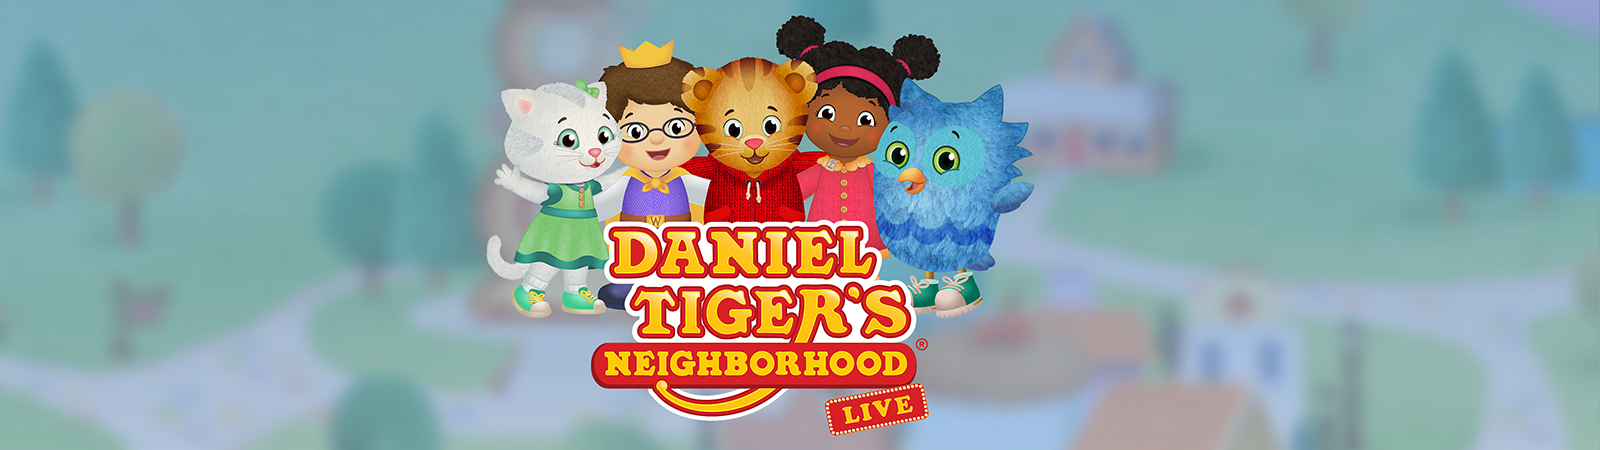 Daniel Tiger's Neighborhood Daniel And Friends Sippy Cup